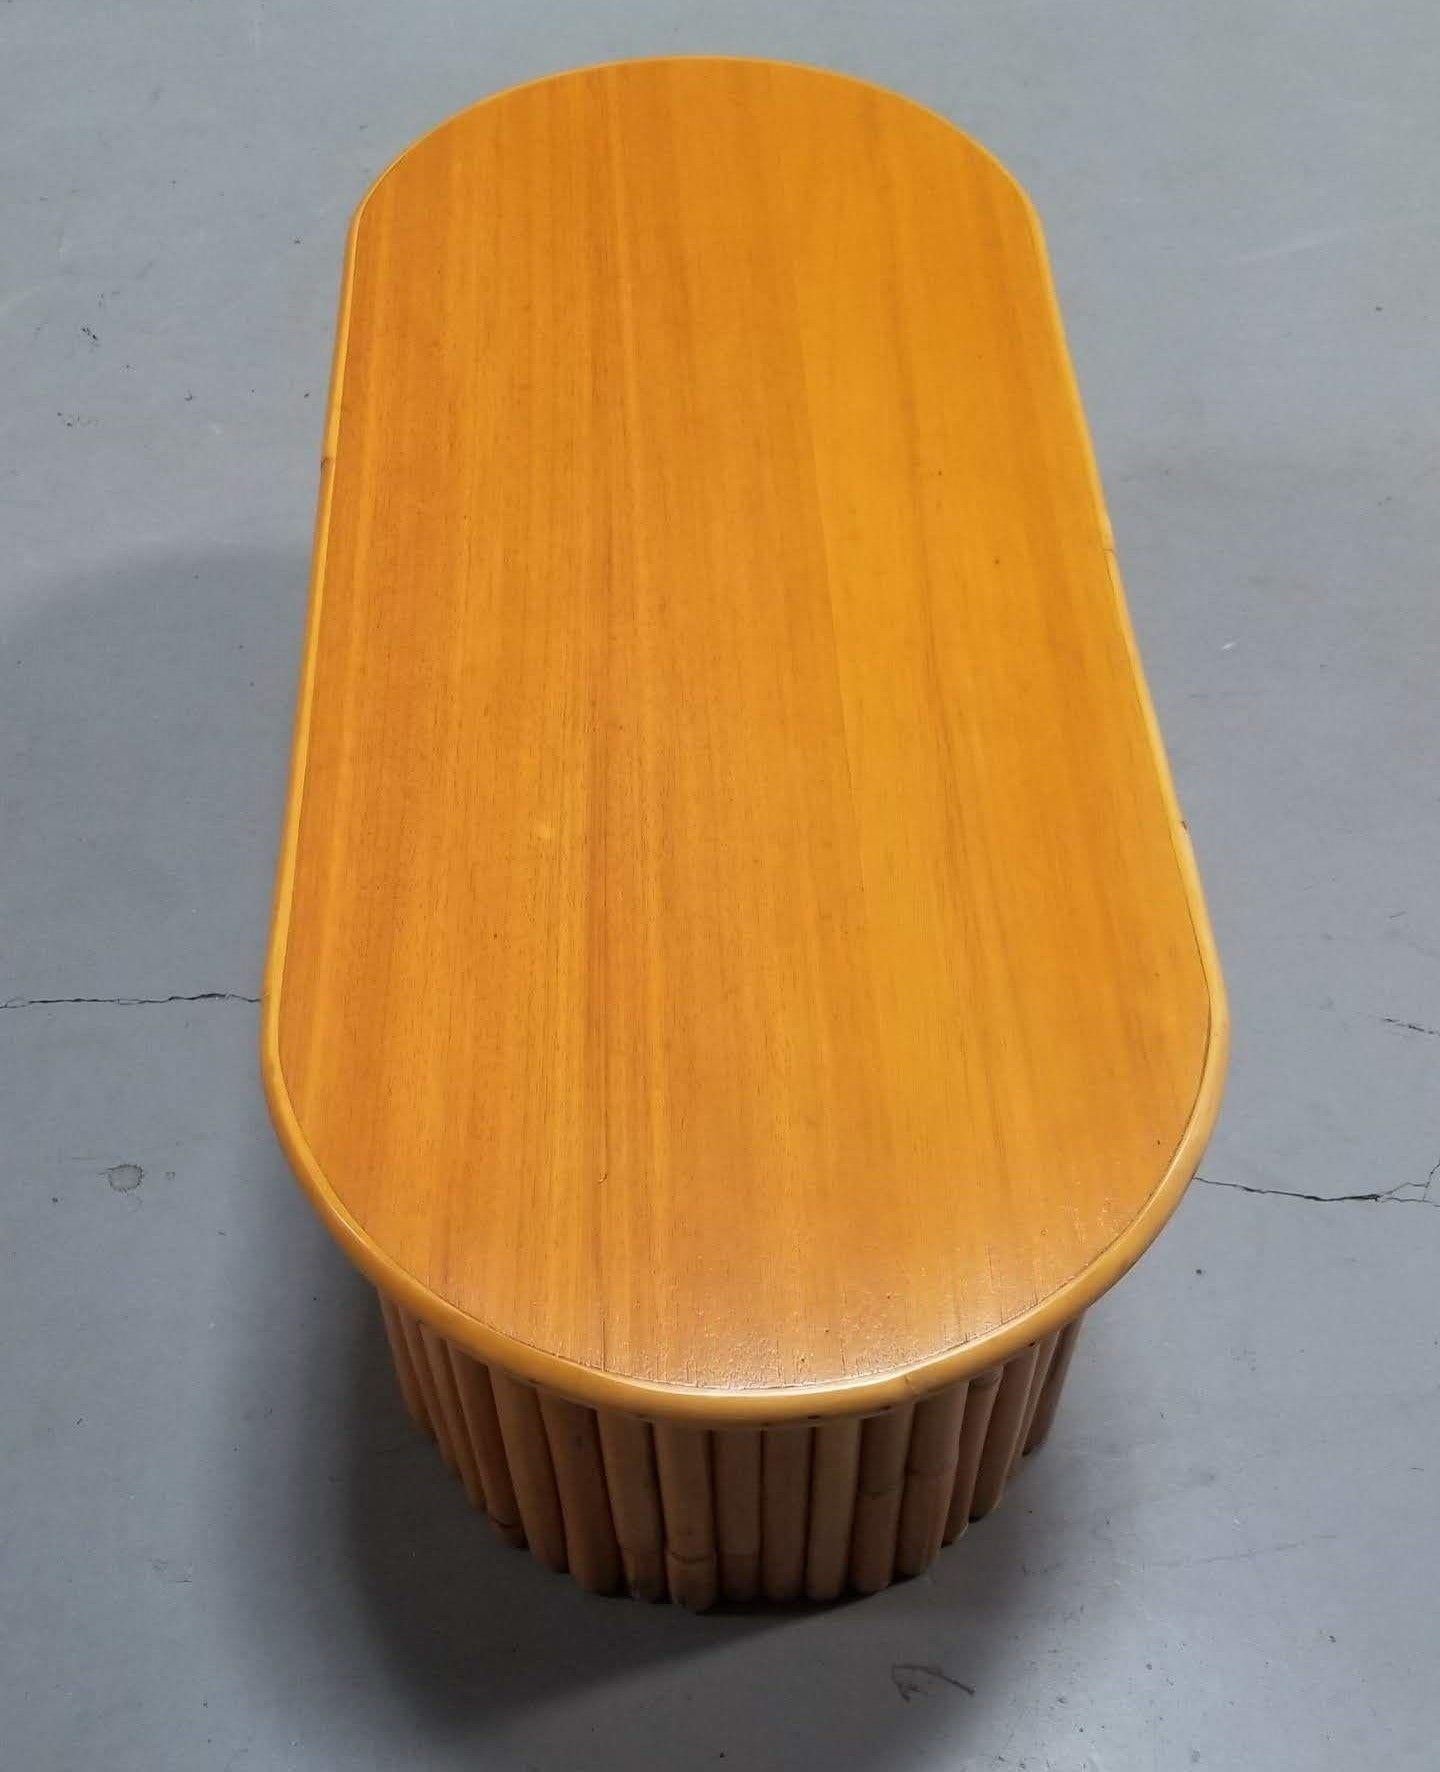 Restored Coffee Table with Vertical Stacked Rattan Half Moon Pedestal Legs In Excellent Condition For Sale In Van Nuys, CA